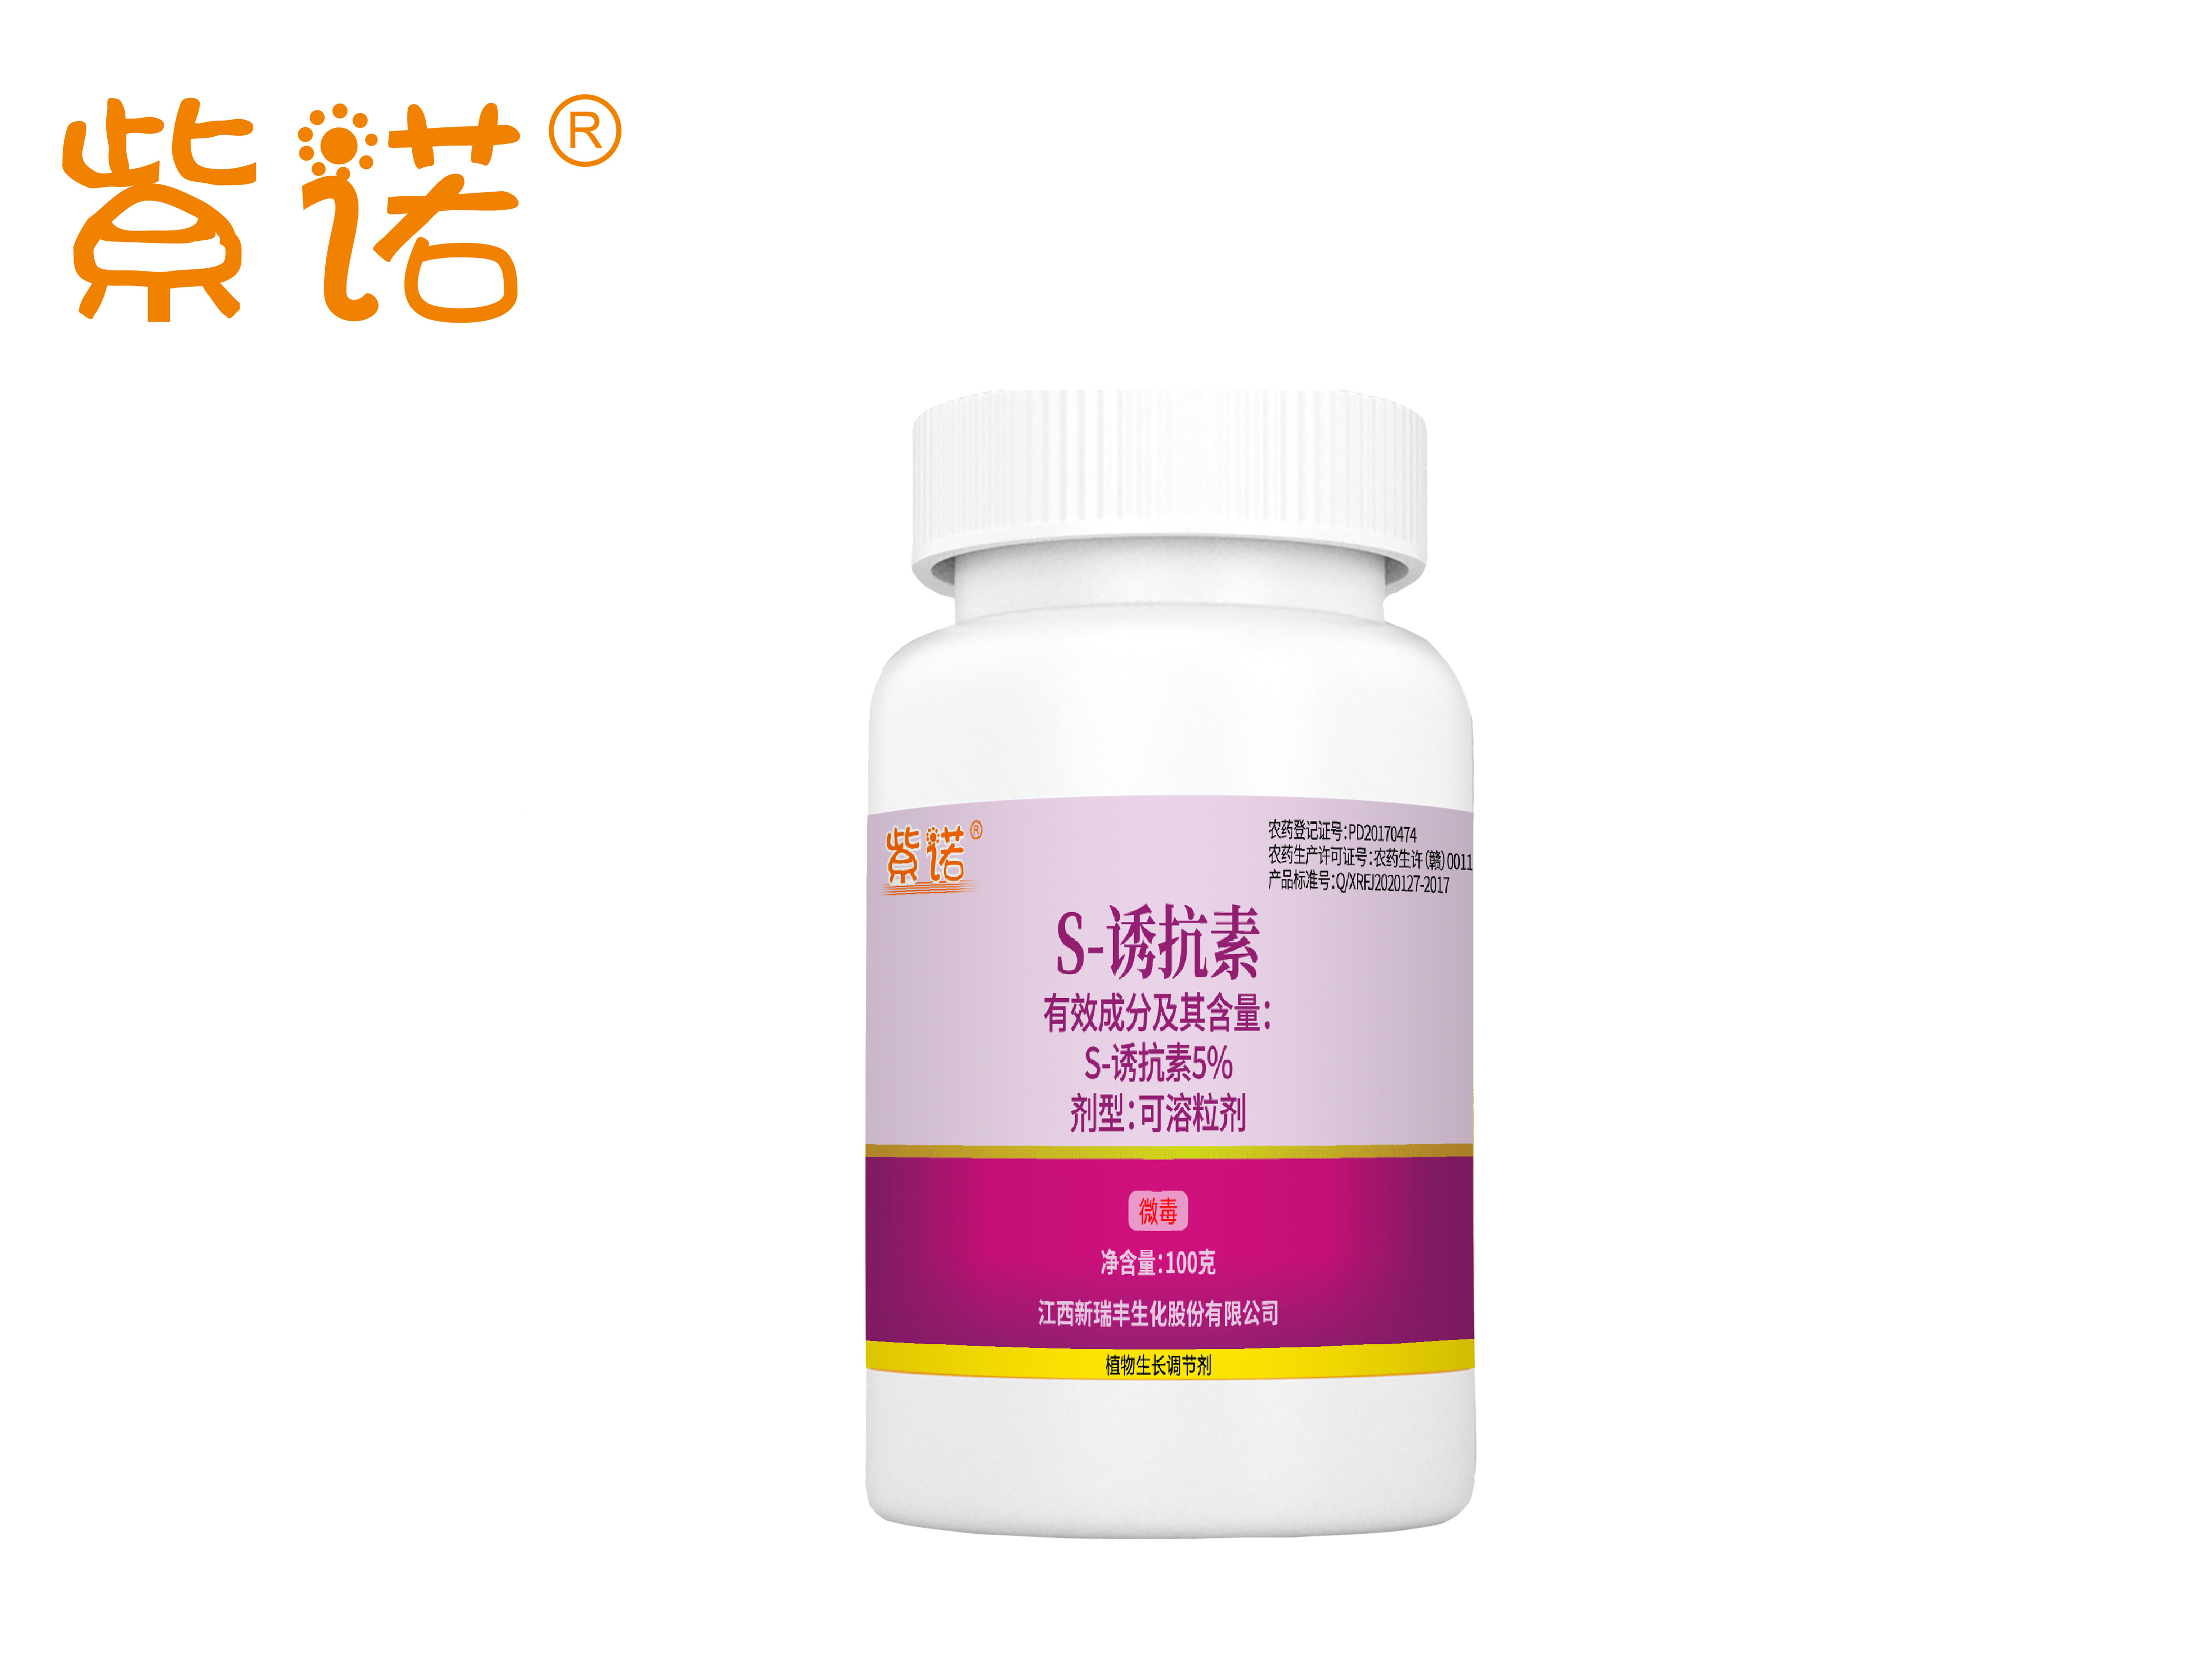 5% S-inducer soluble granules